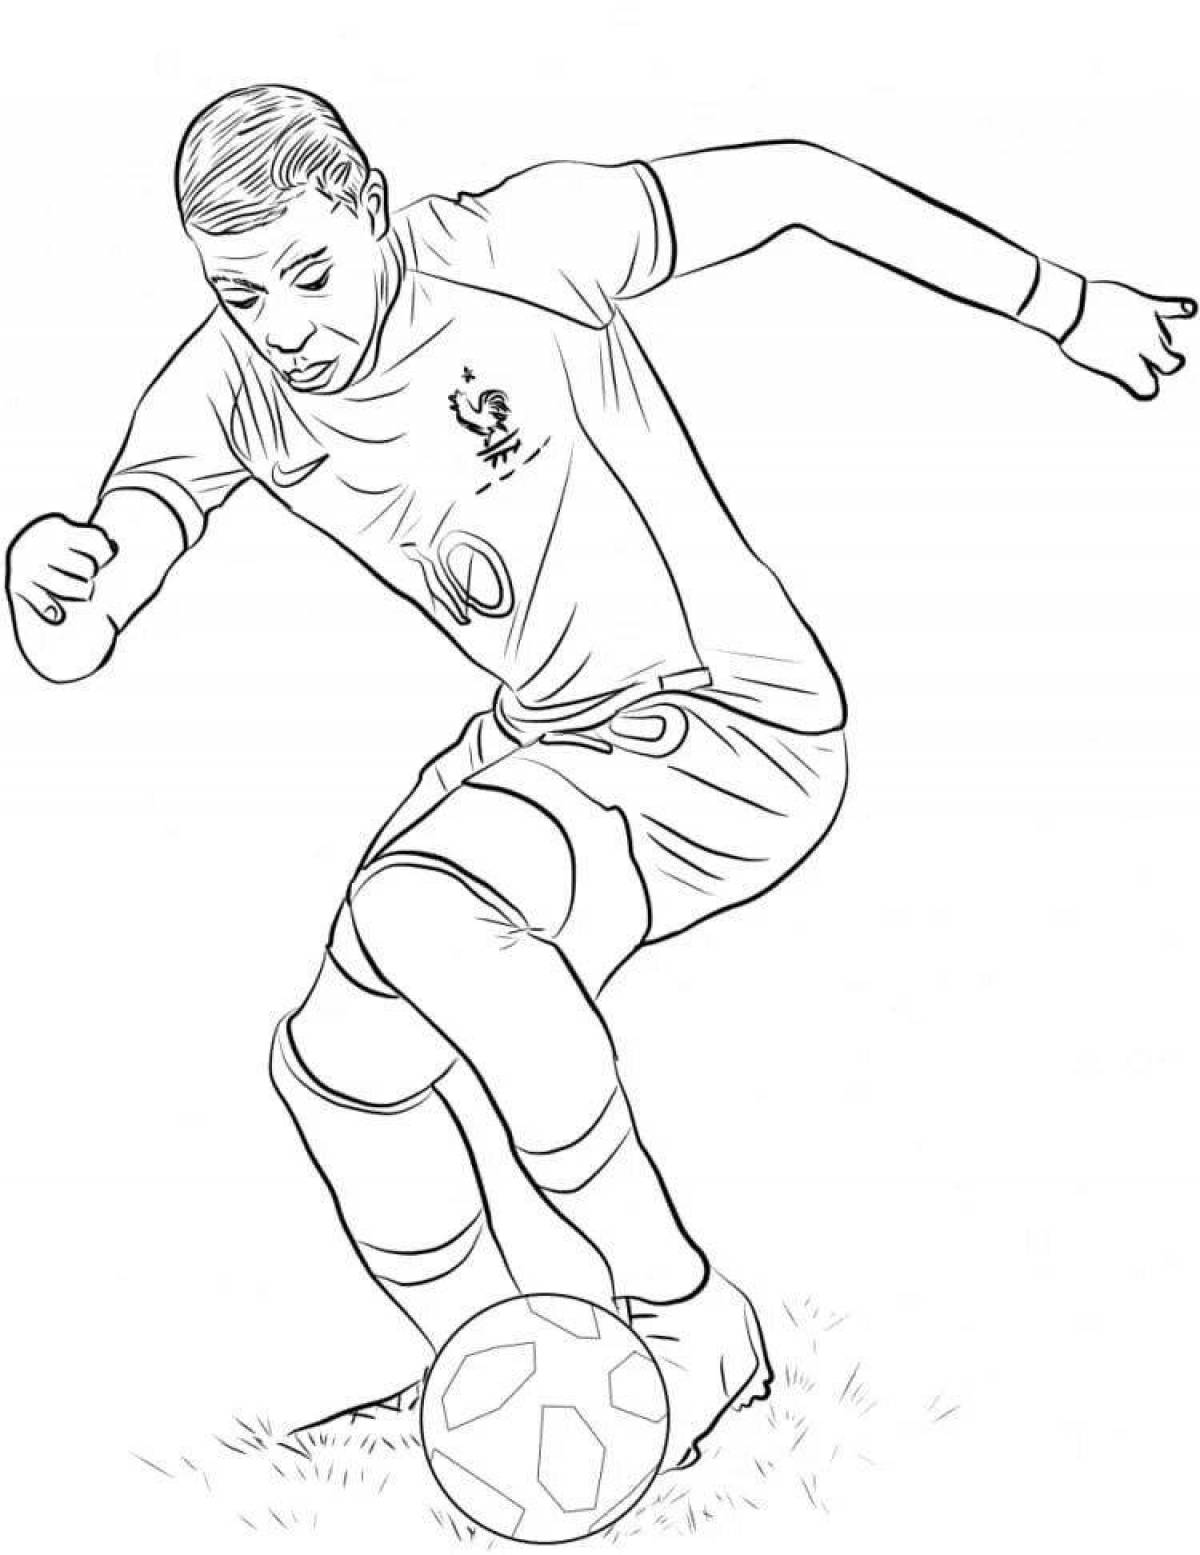 Coloring book magical football player